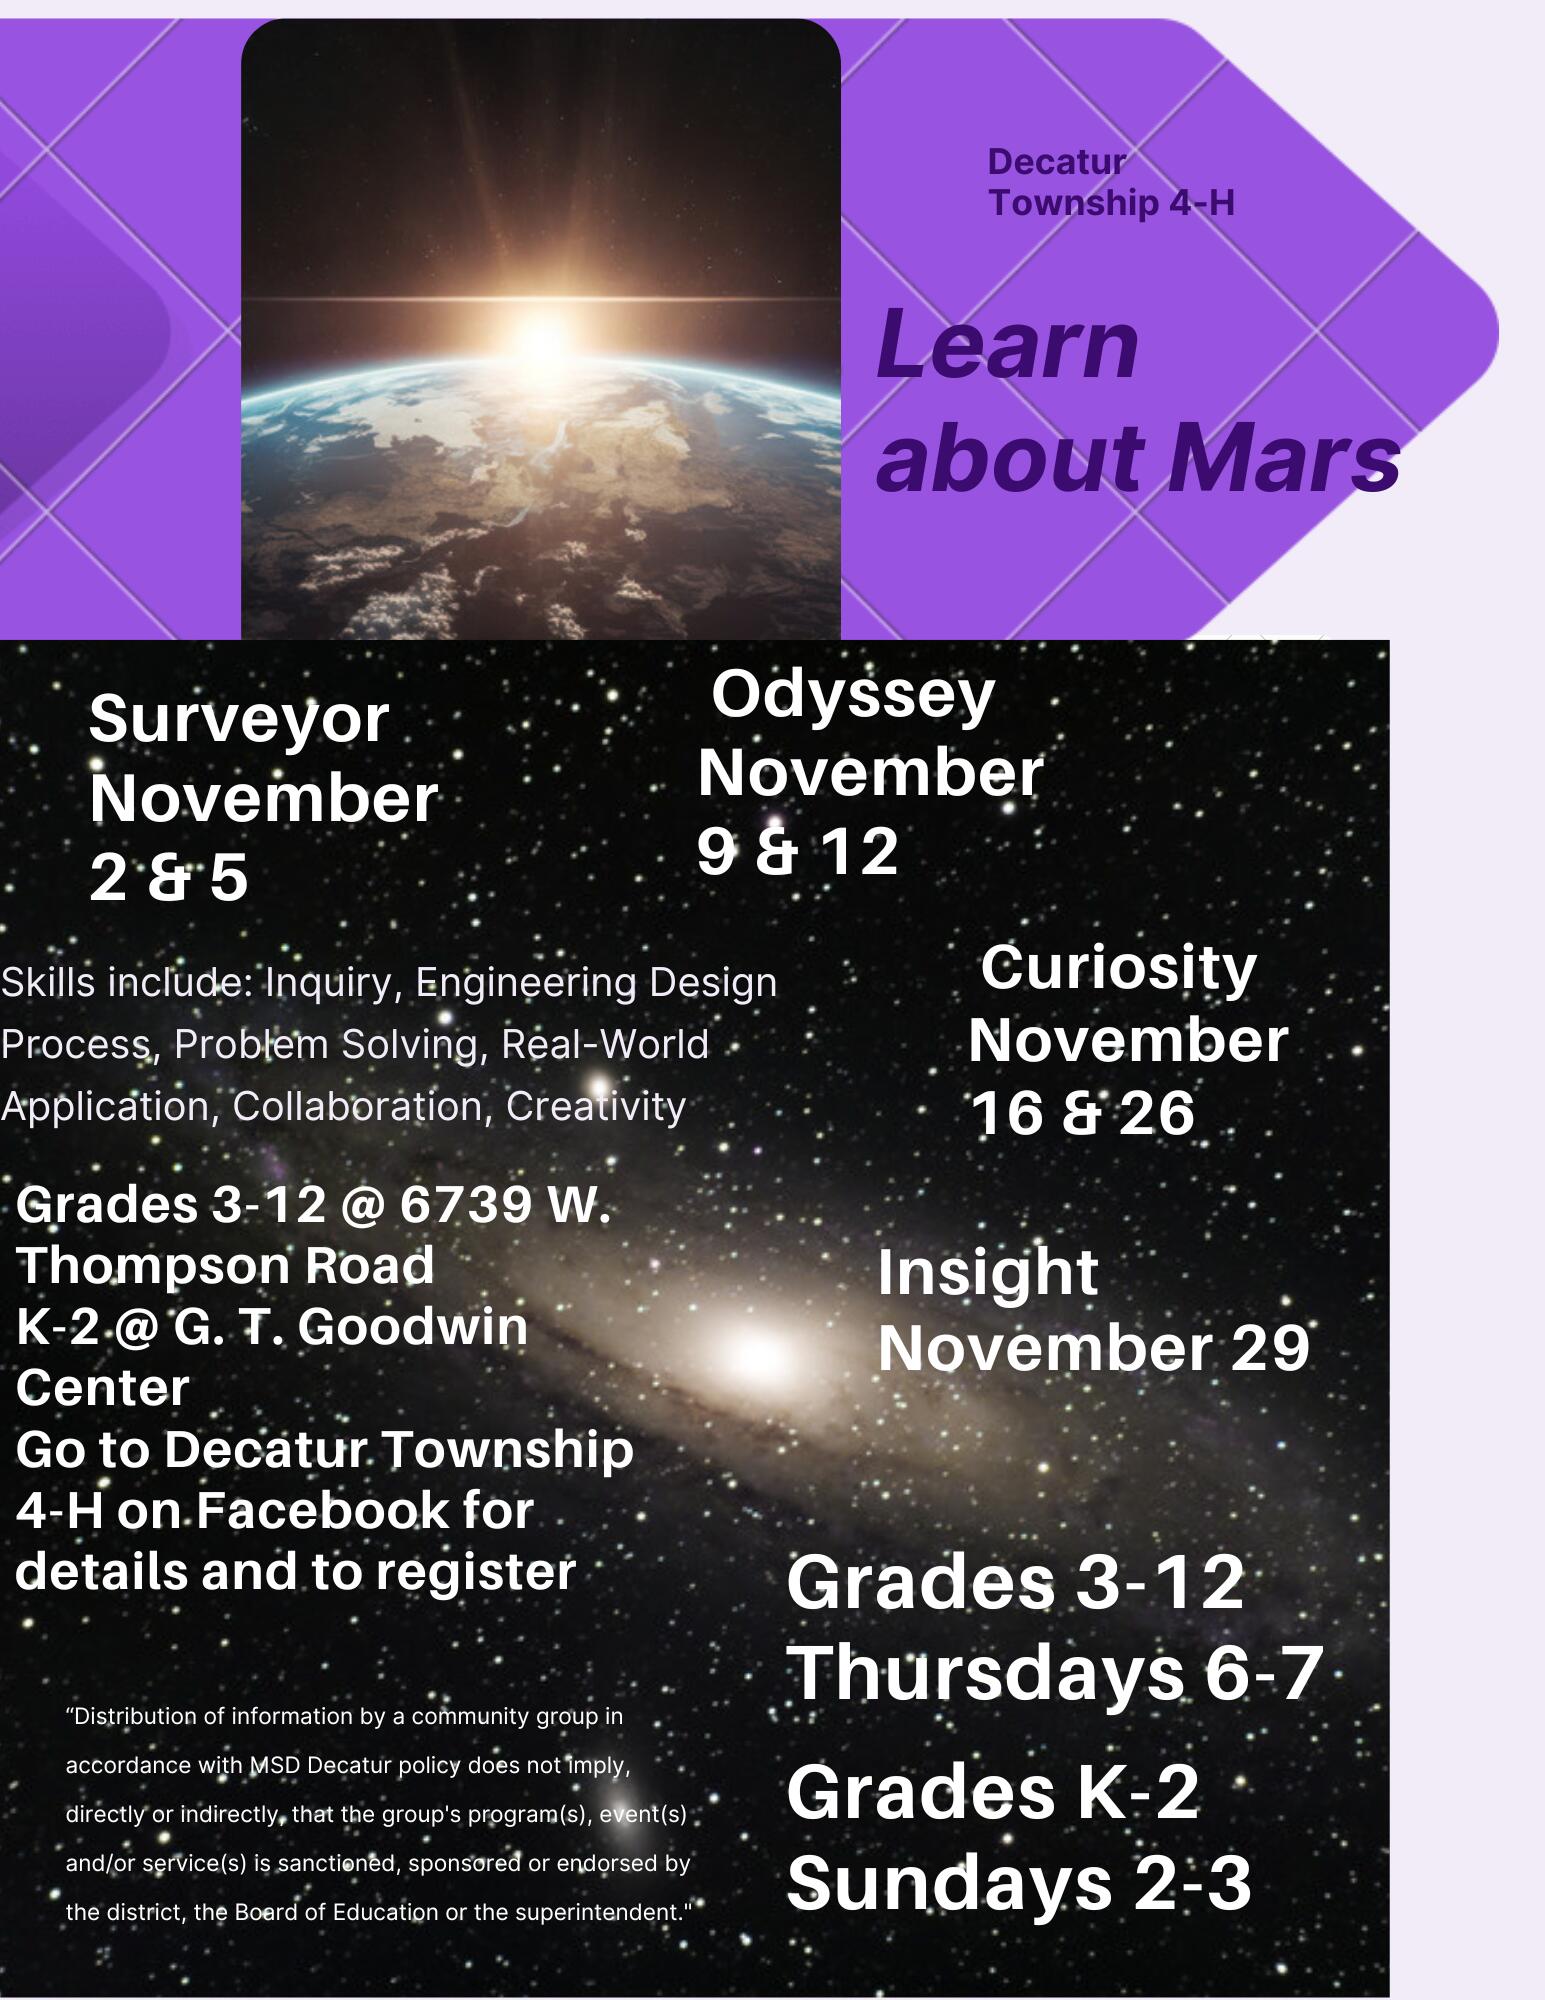 4-H Learn about Mars